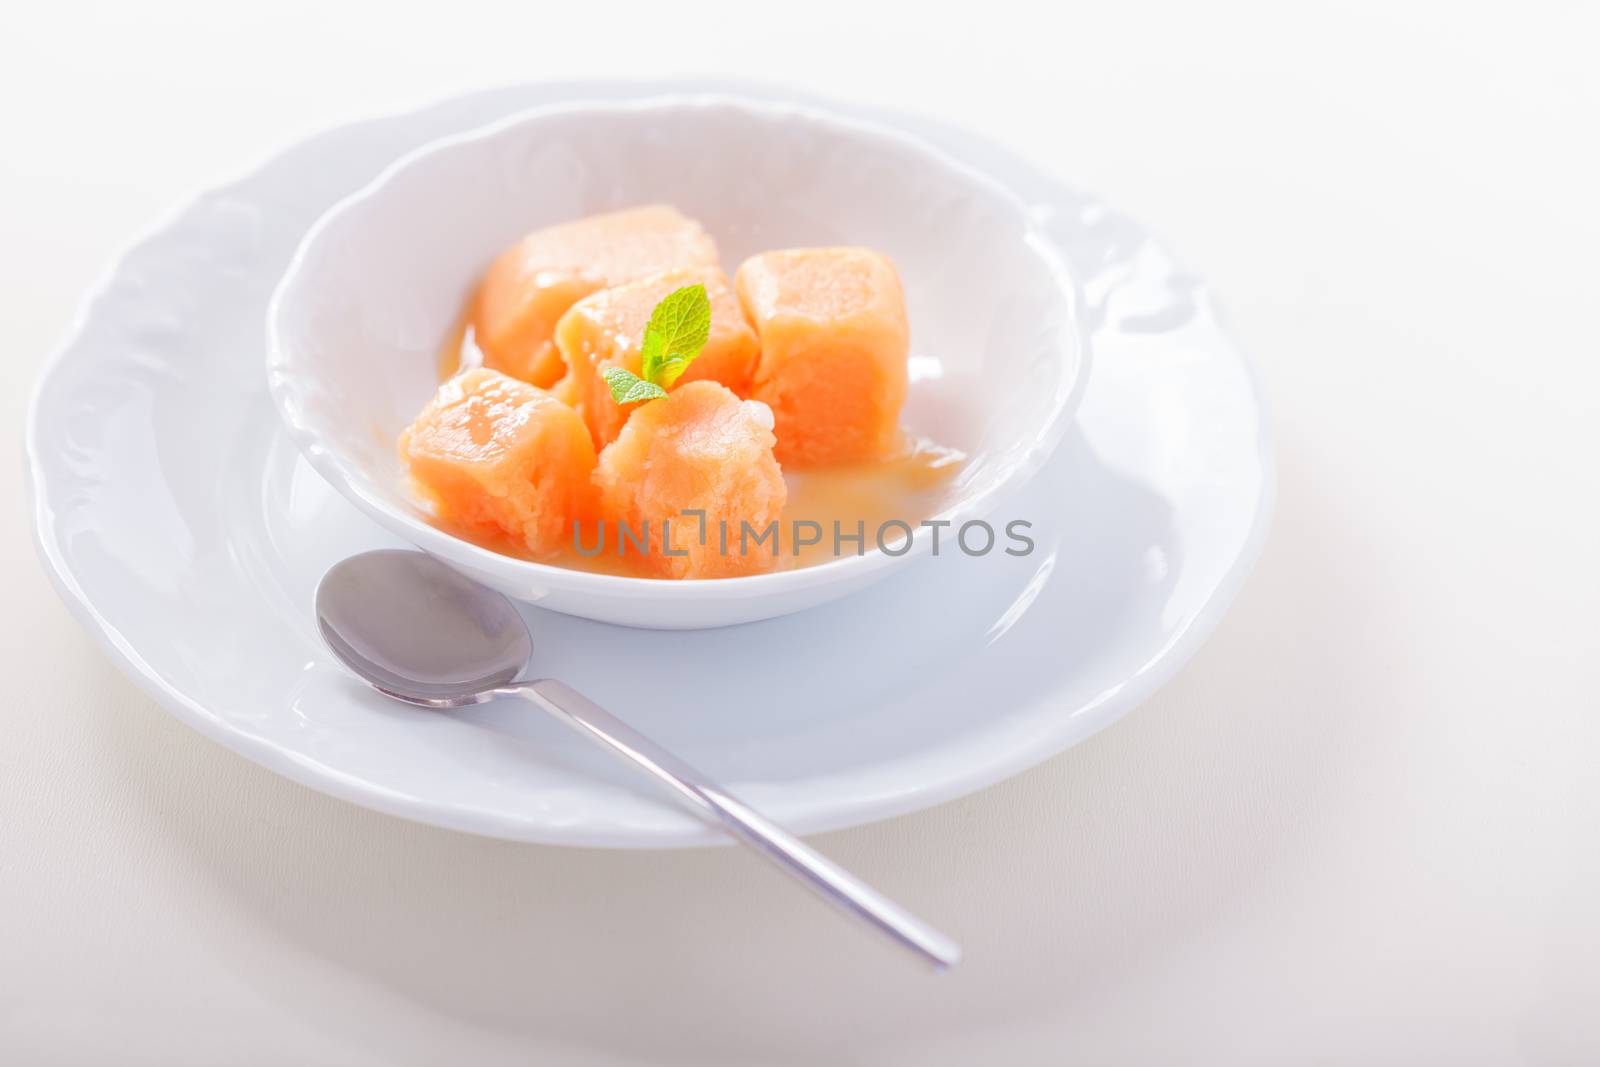 Apricot sorbet with mint served on the table